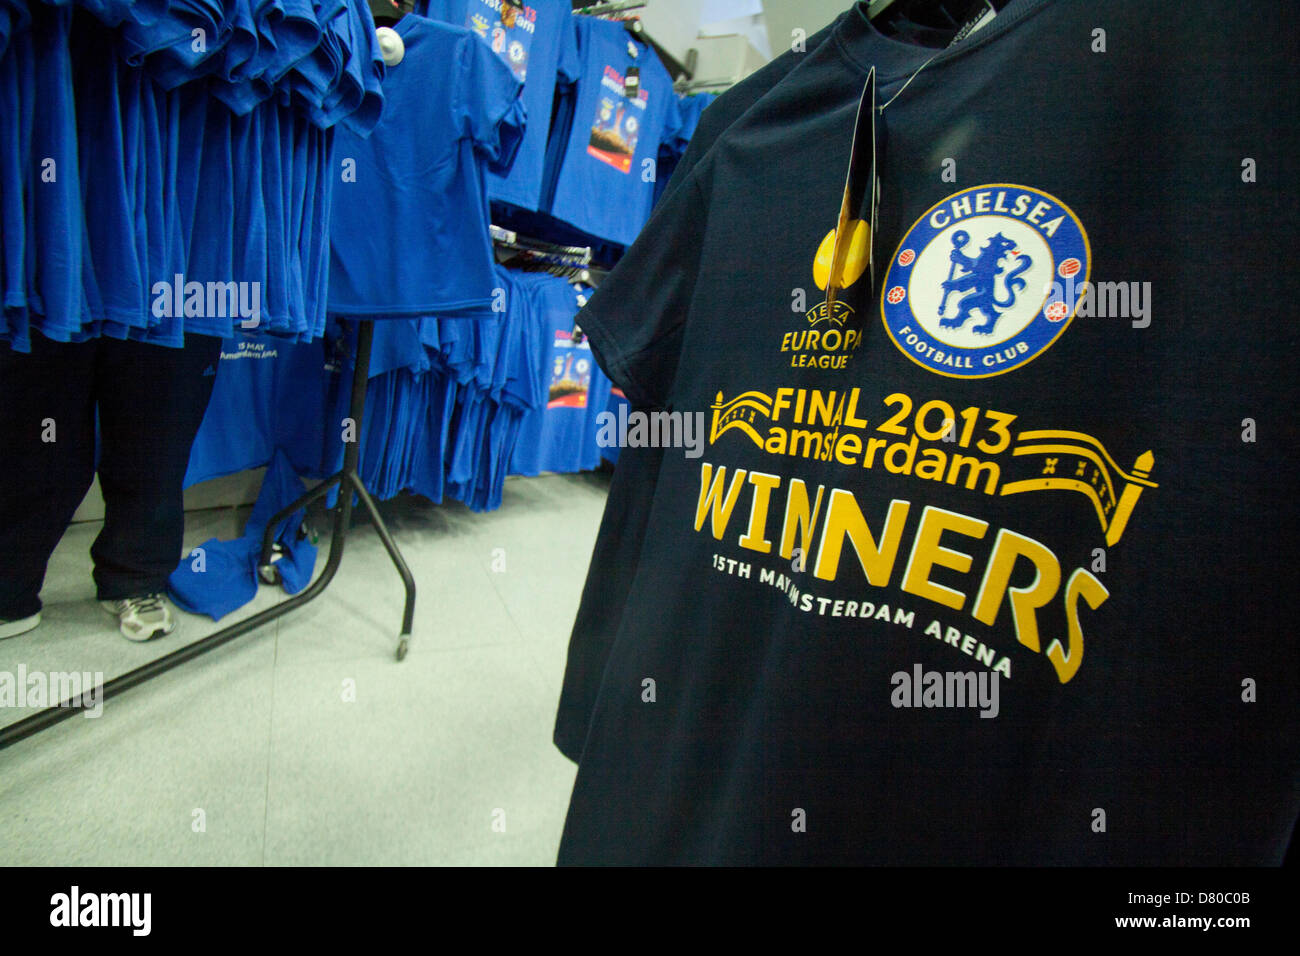 London UK. 16th May 2013. Chelsea store selling Europa League winners souvenir shirts and sport memorabilia after Chelsea FC wins the Europa League final against Benfica in Amsterdam on May 15th. Credit:  amer ghazzal / Alamy Live News Stock Photo